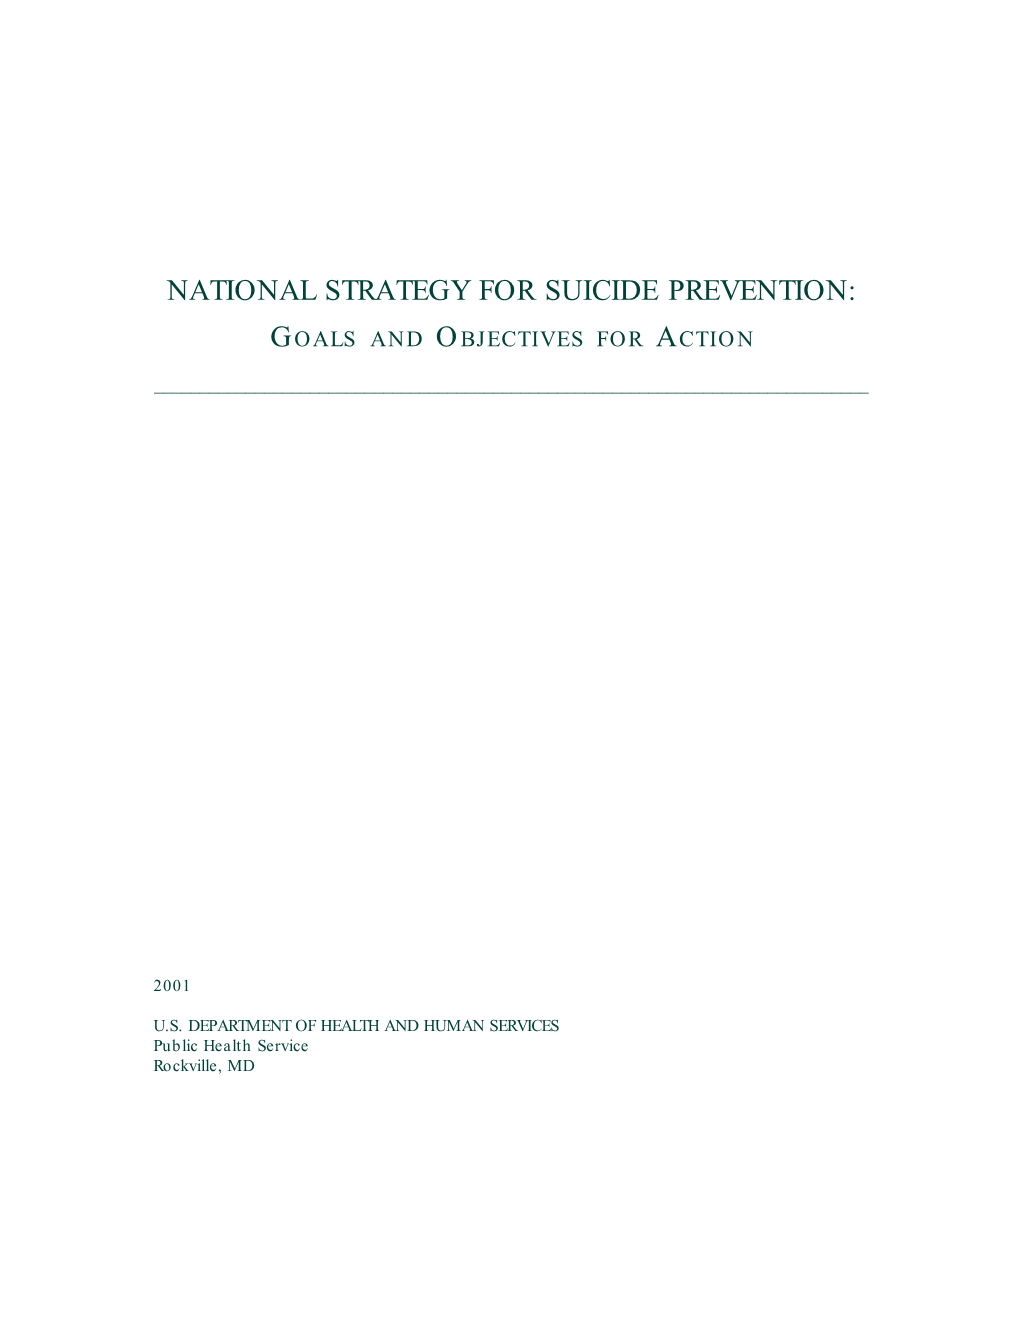 National Strategy for Suicide Prevention: Goals and Objectives for Action